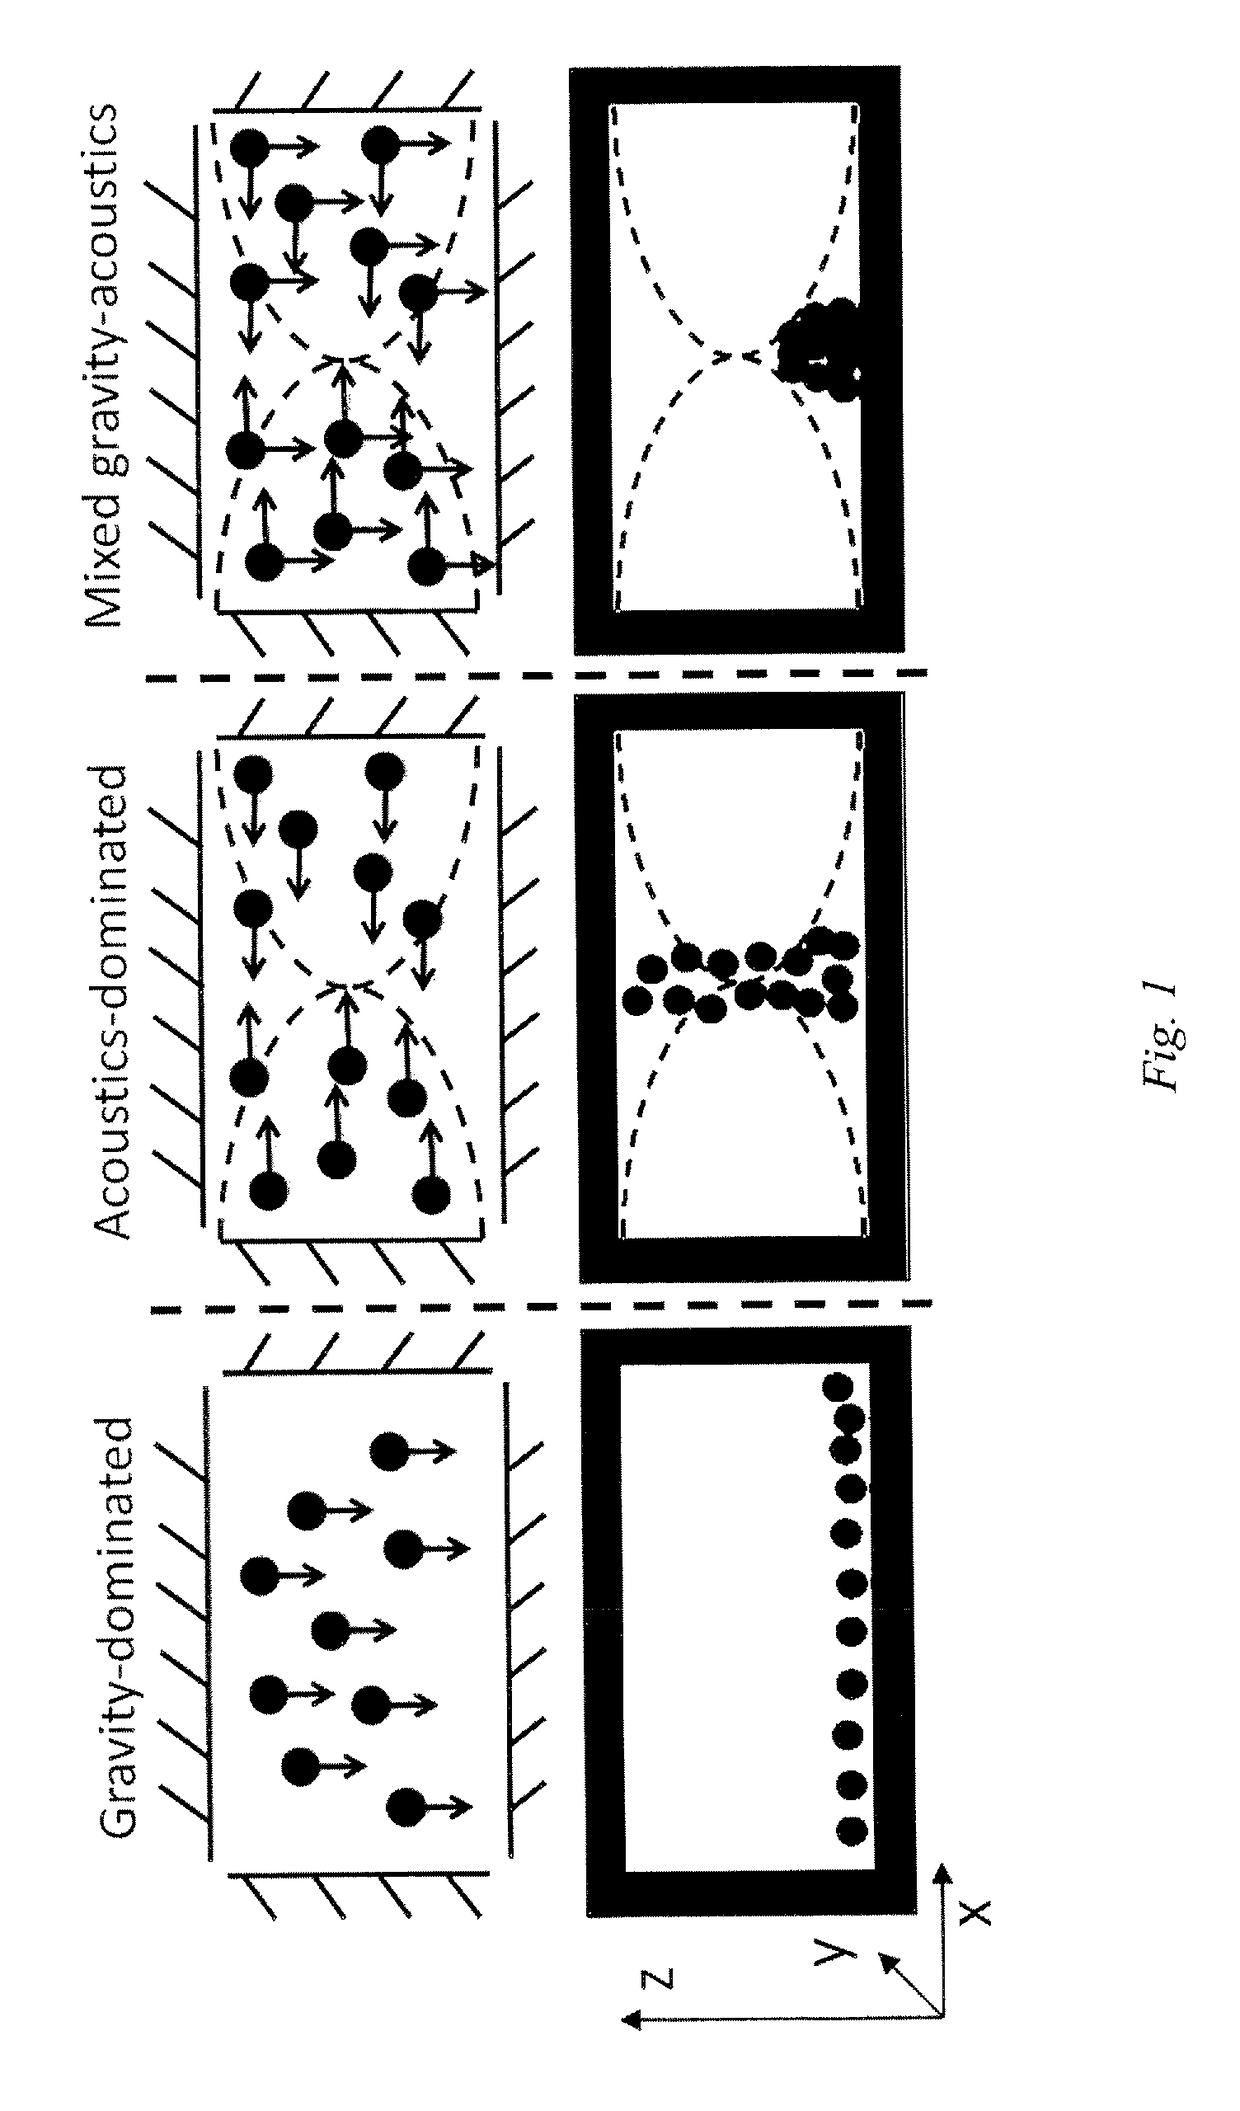 Anisotropic films templated using ultrasonic focusing